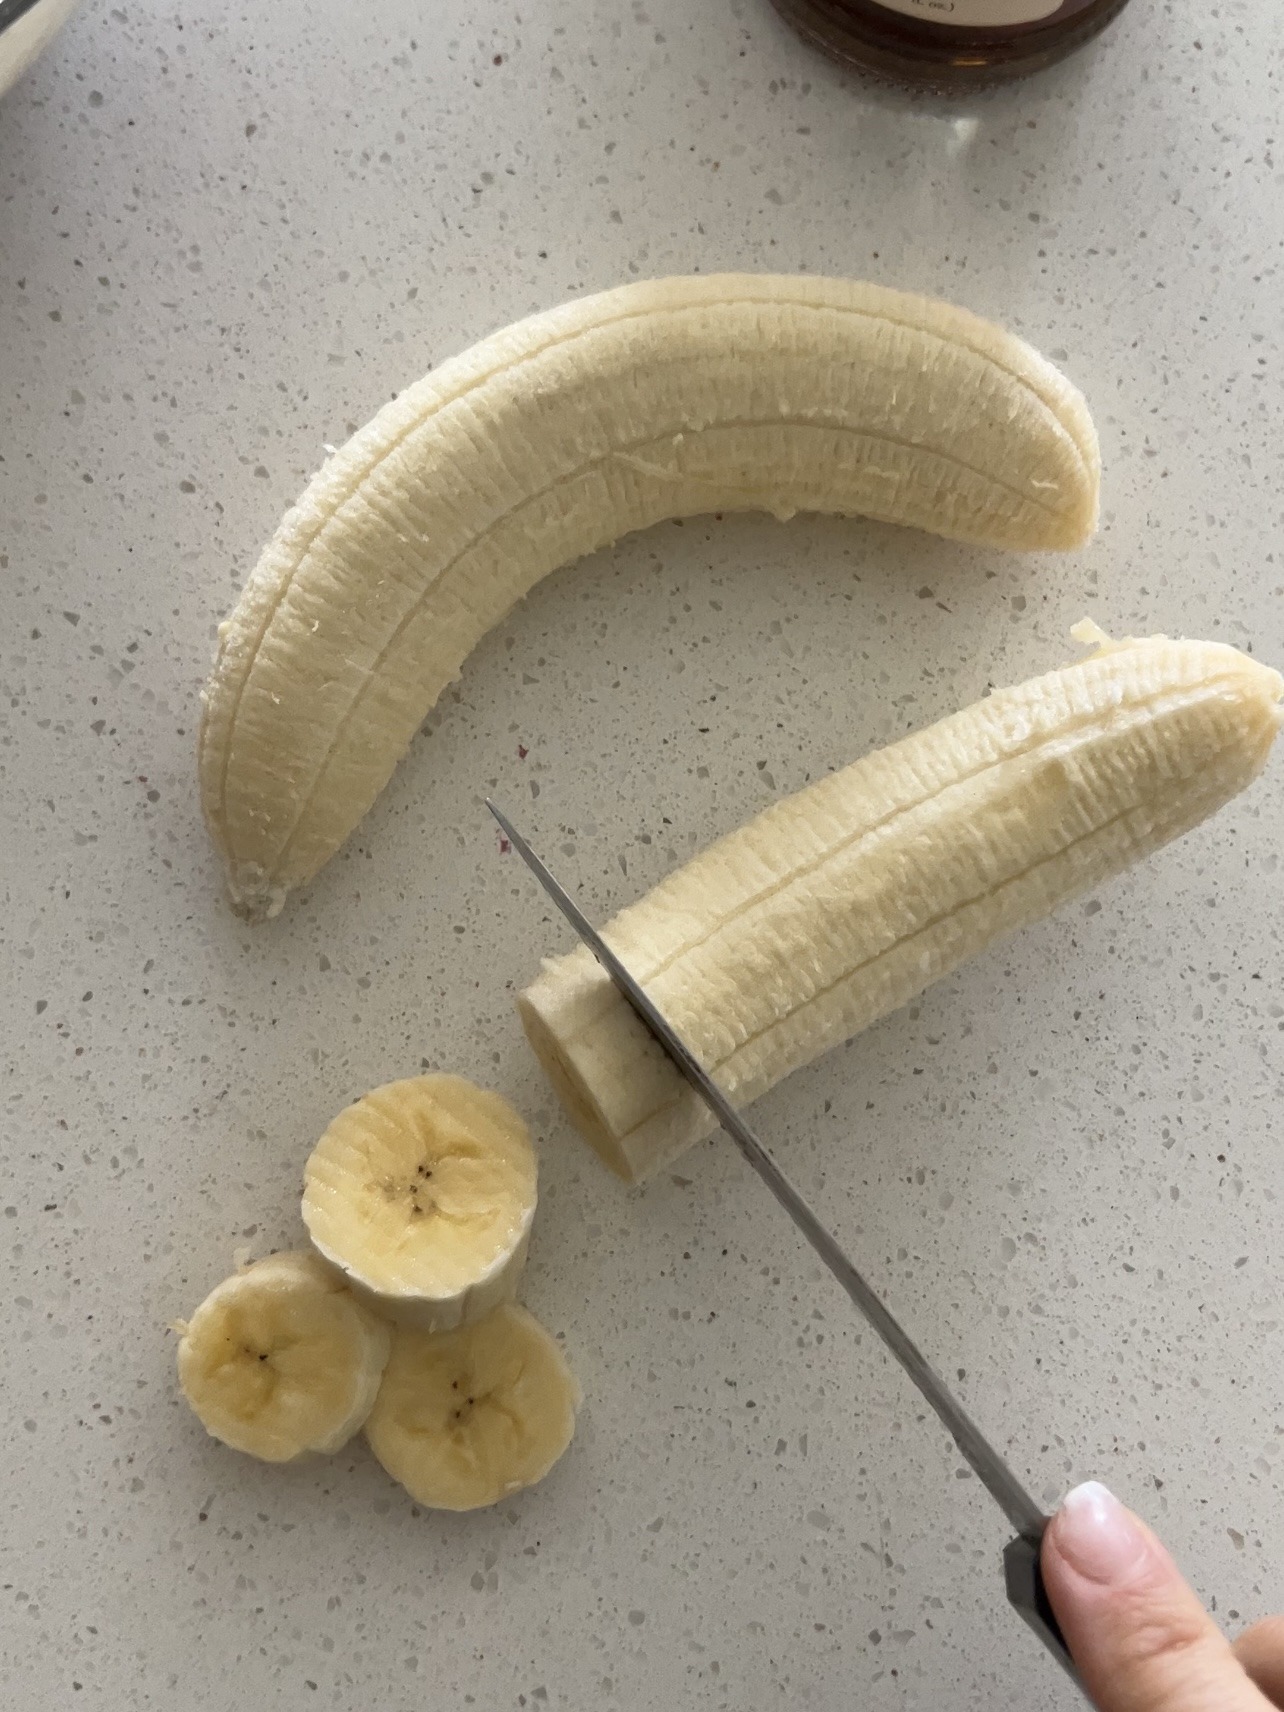 Knife slicing two bananas into medallions. 